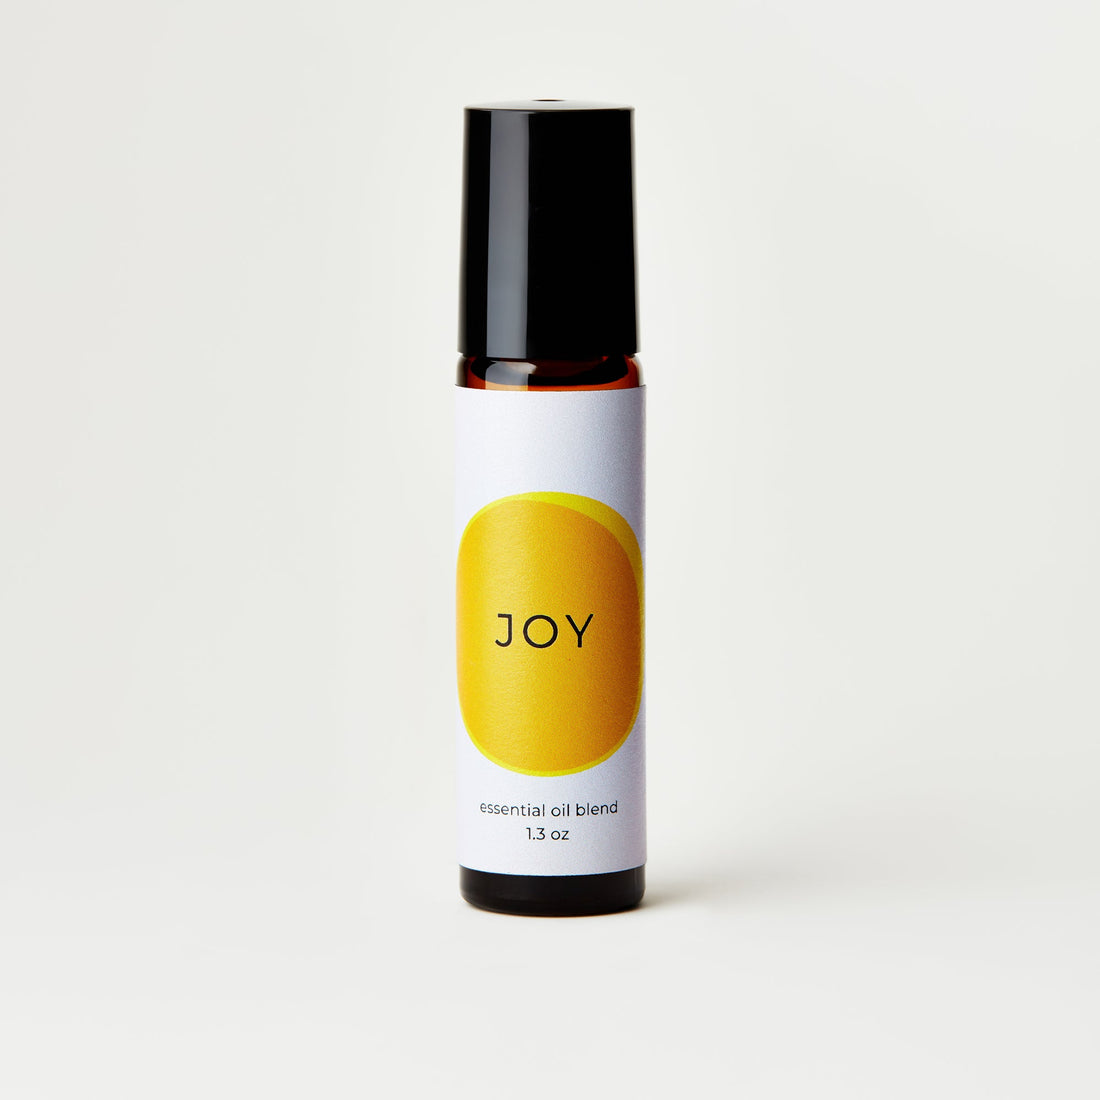 Joy Box by Gifted